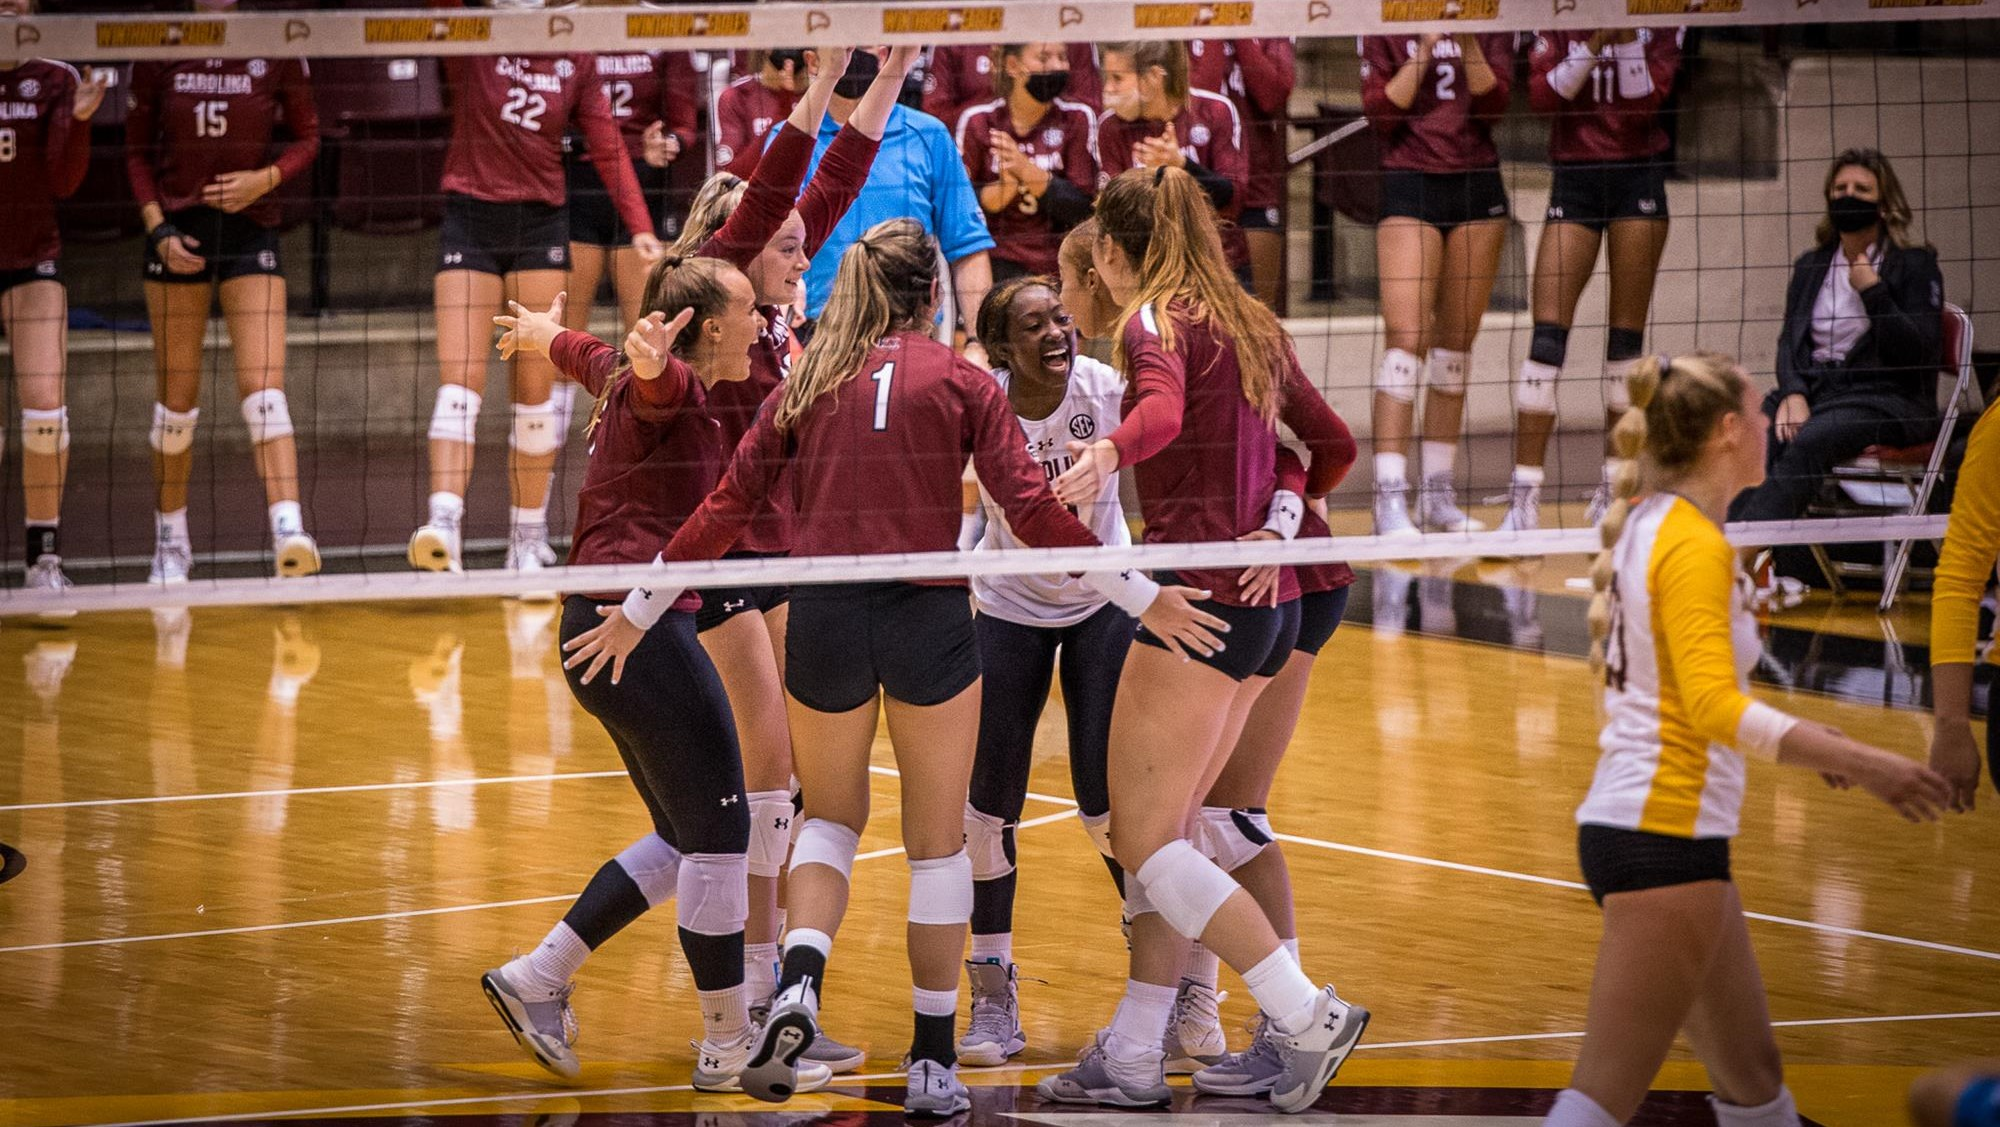 Gamecocks Sweep Winthrop in Thursday Night Match